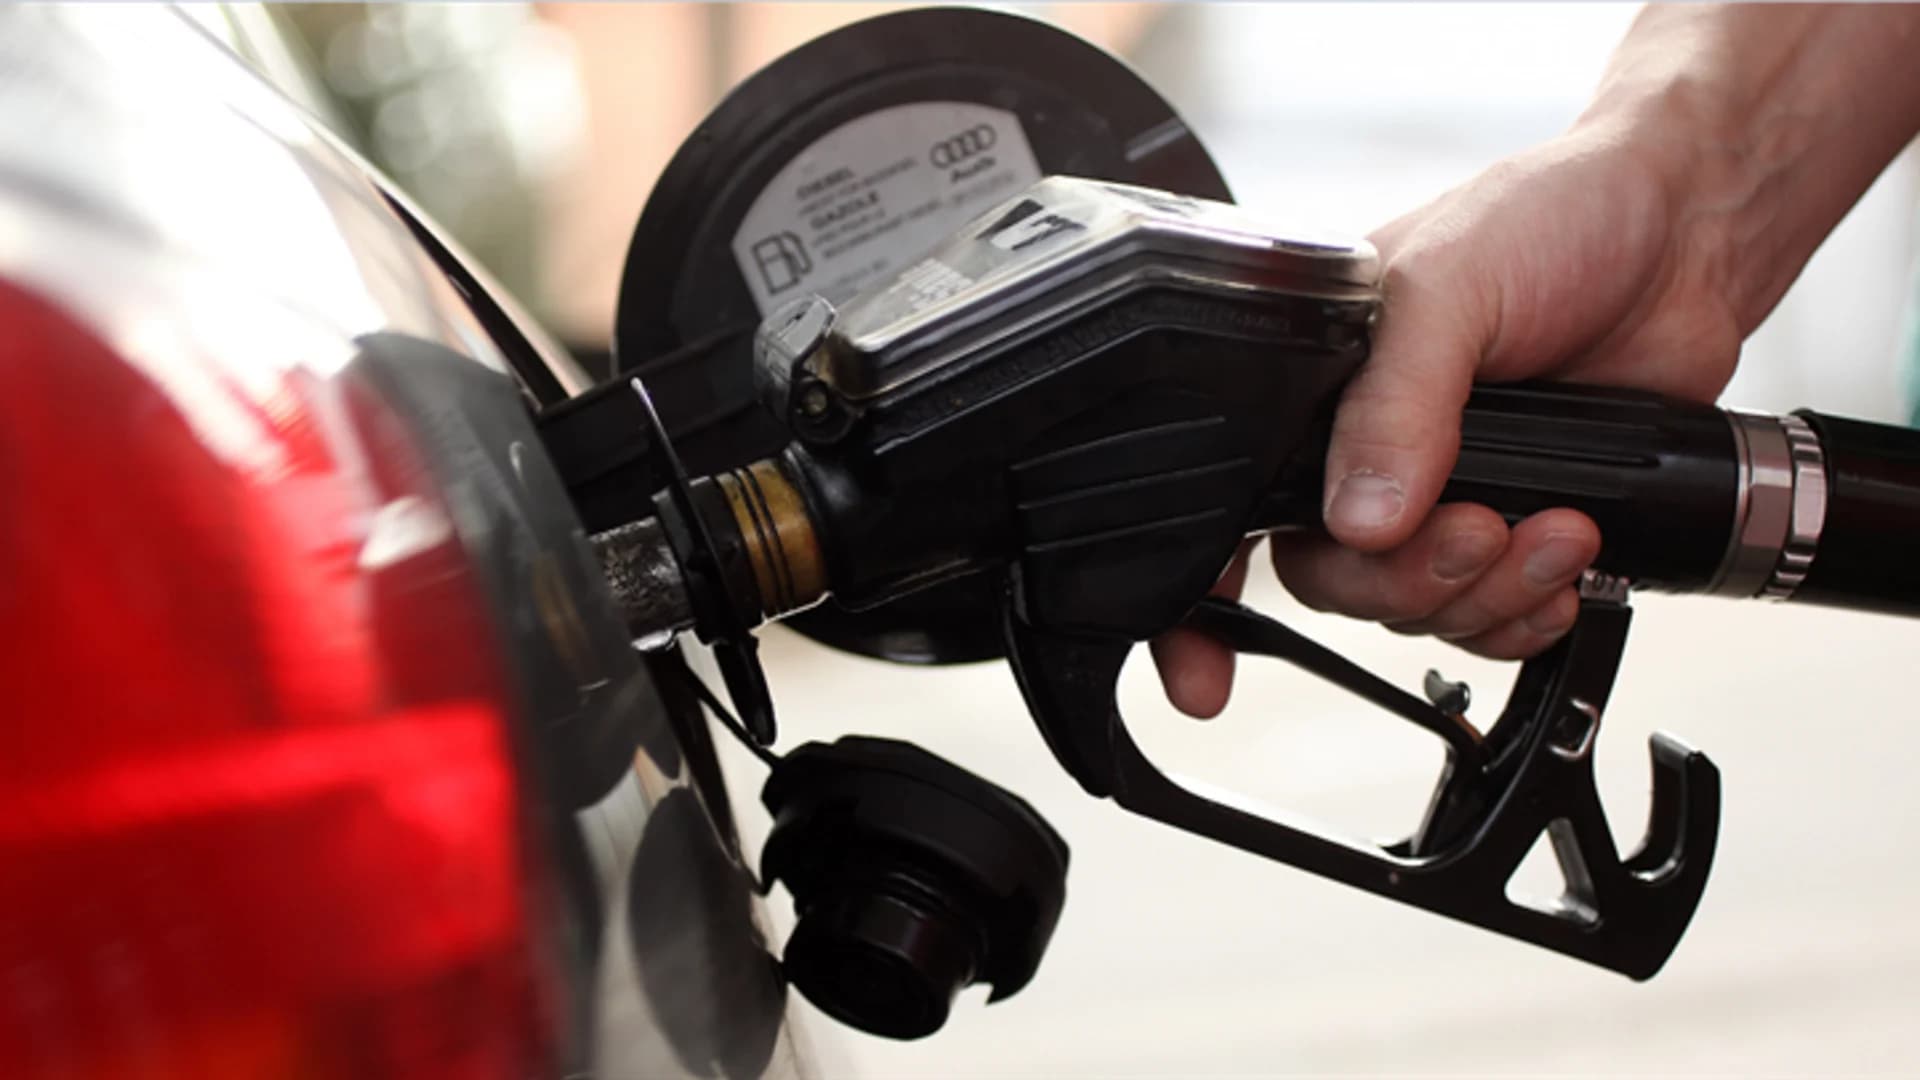 Gas prices remain high in NJ as holiday weekend approaches